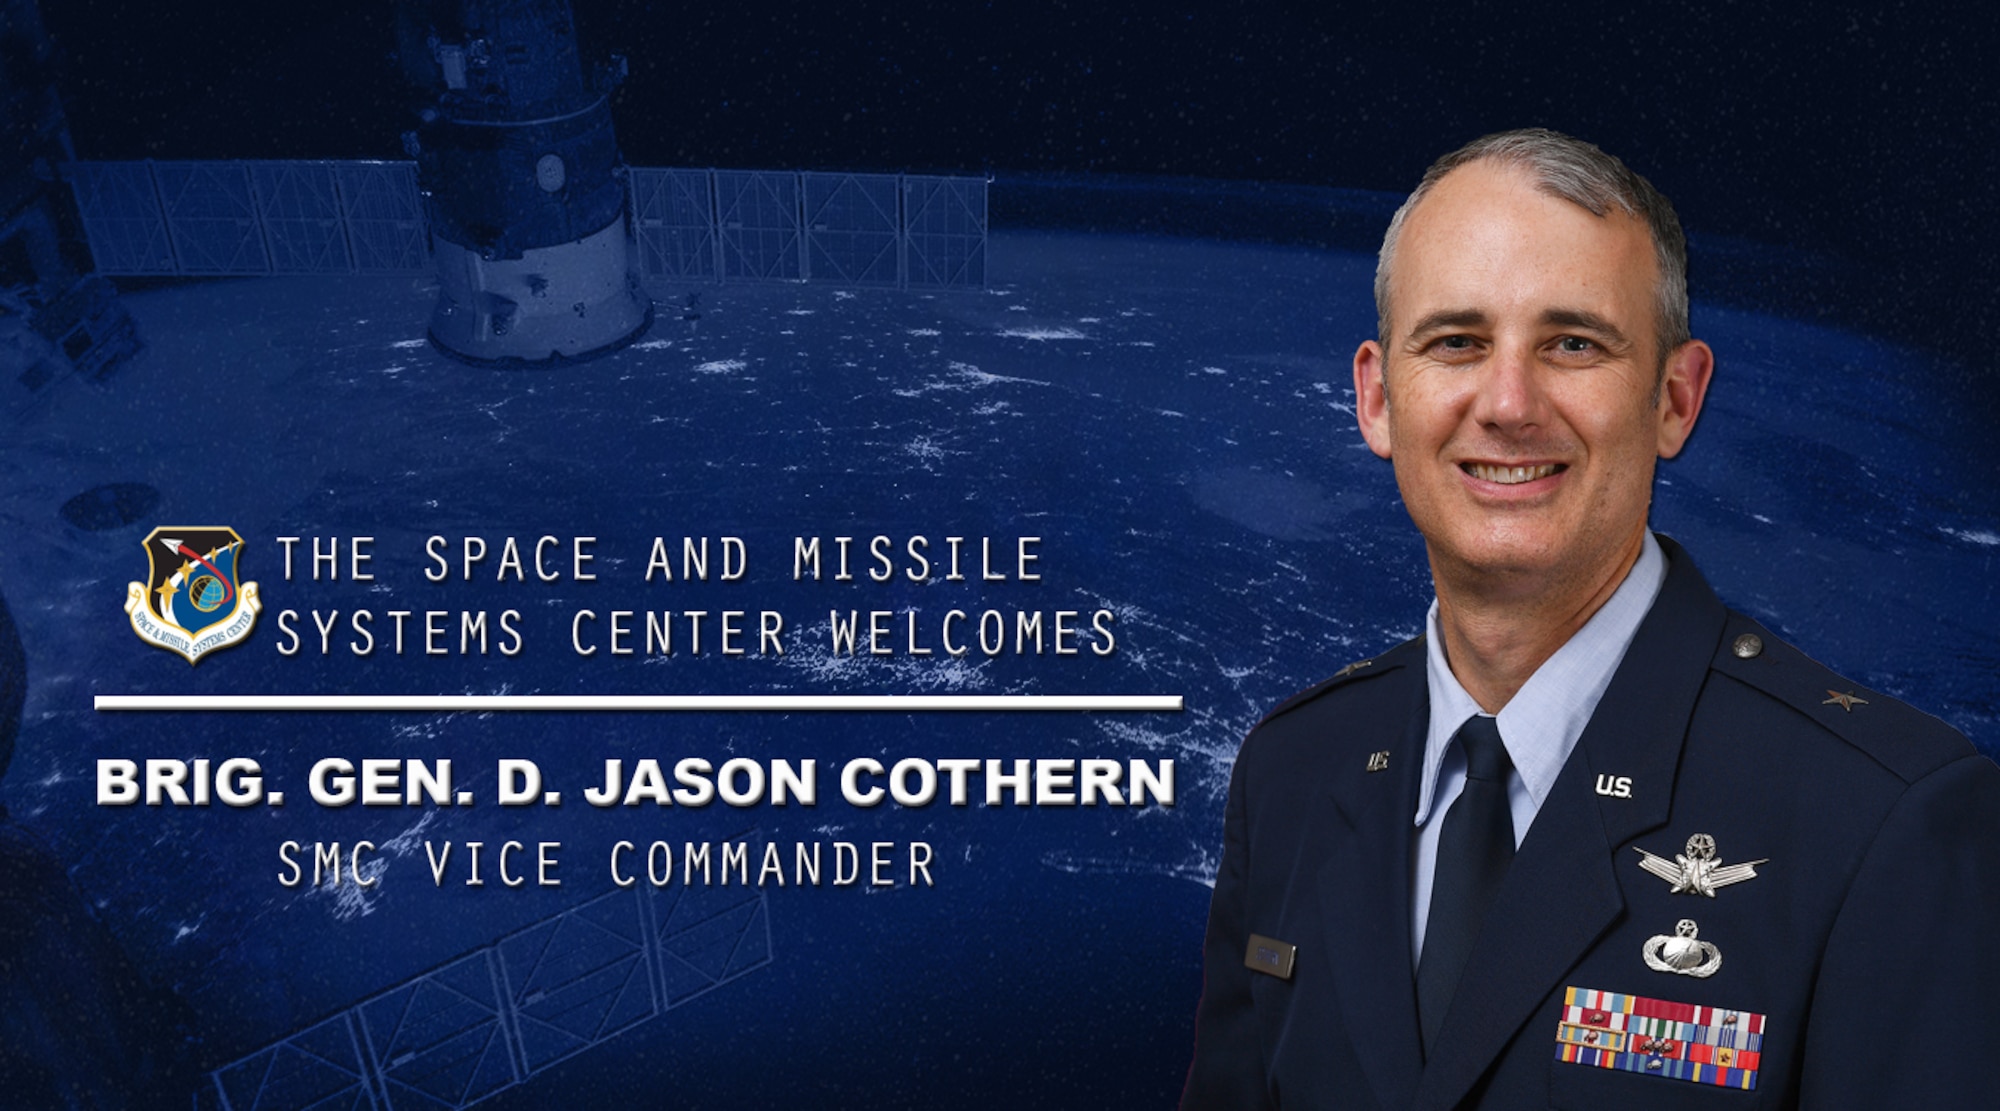 The men and women of the Space and Missile Systems Center officially welcomed Brig. Gen. D. Jason Cothern as the newest vice commander, June 8 2020 at Los Angeles Air Force Base, California. Cothern's career spans 27 year and 15 assignments. (U.S. Space Force graphic by Chip Pons)